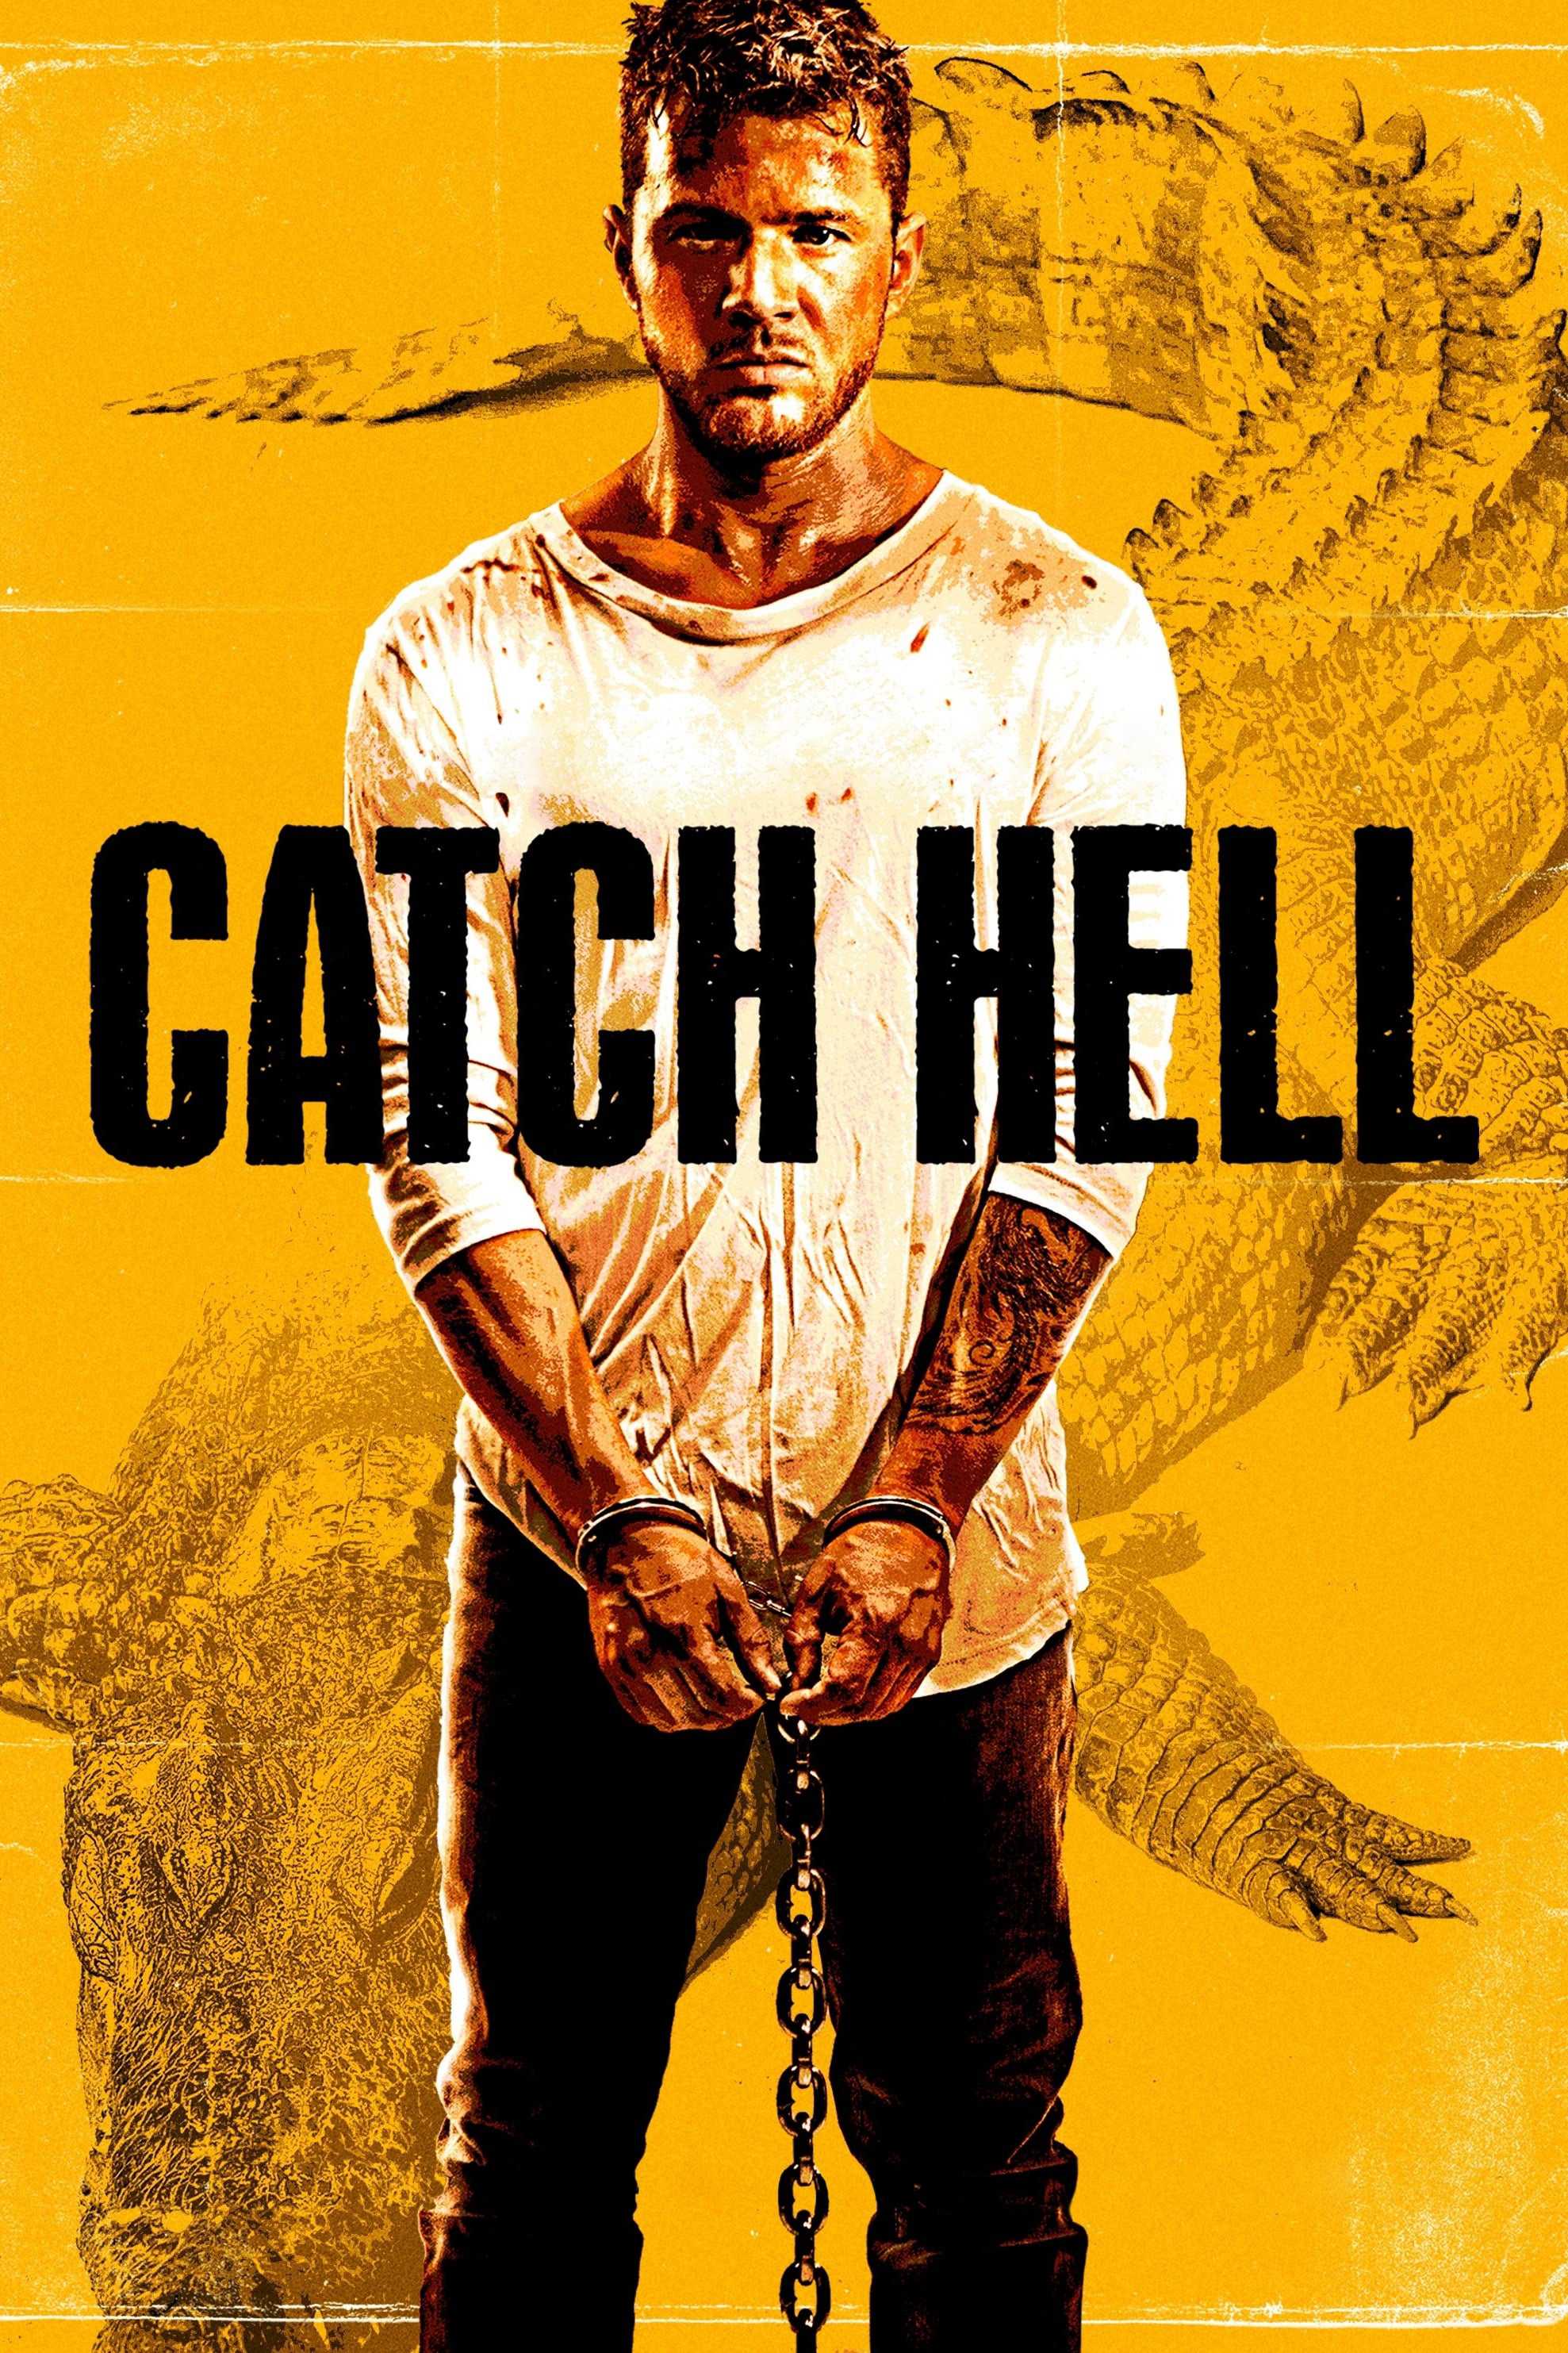 Catch hell - Catch hell